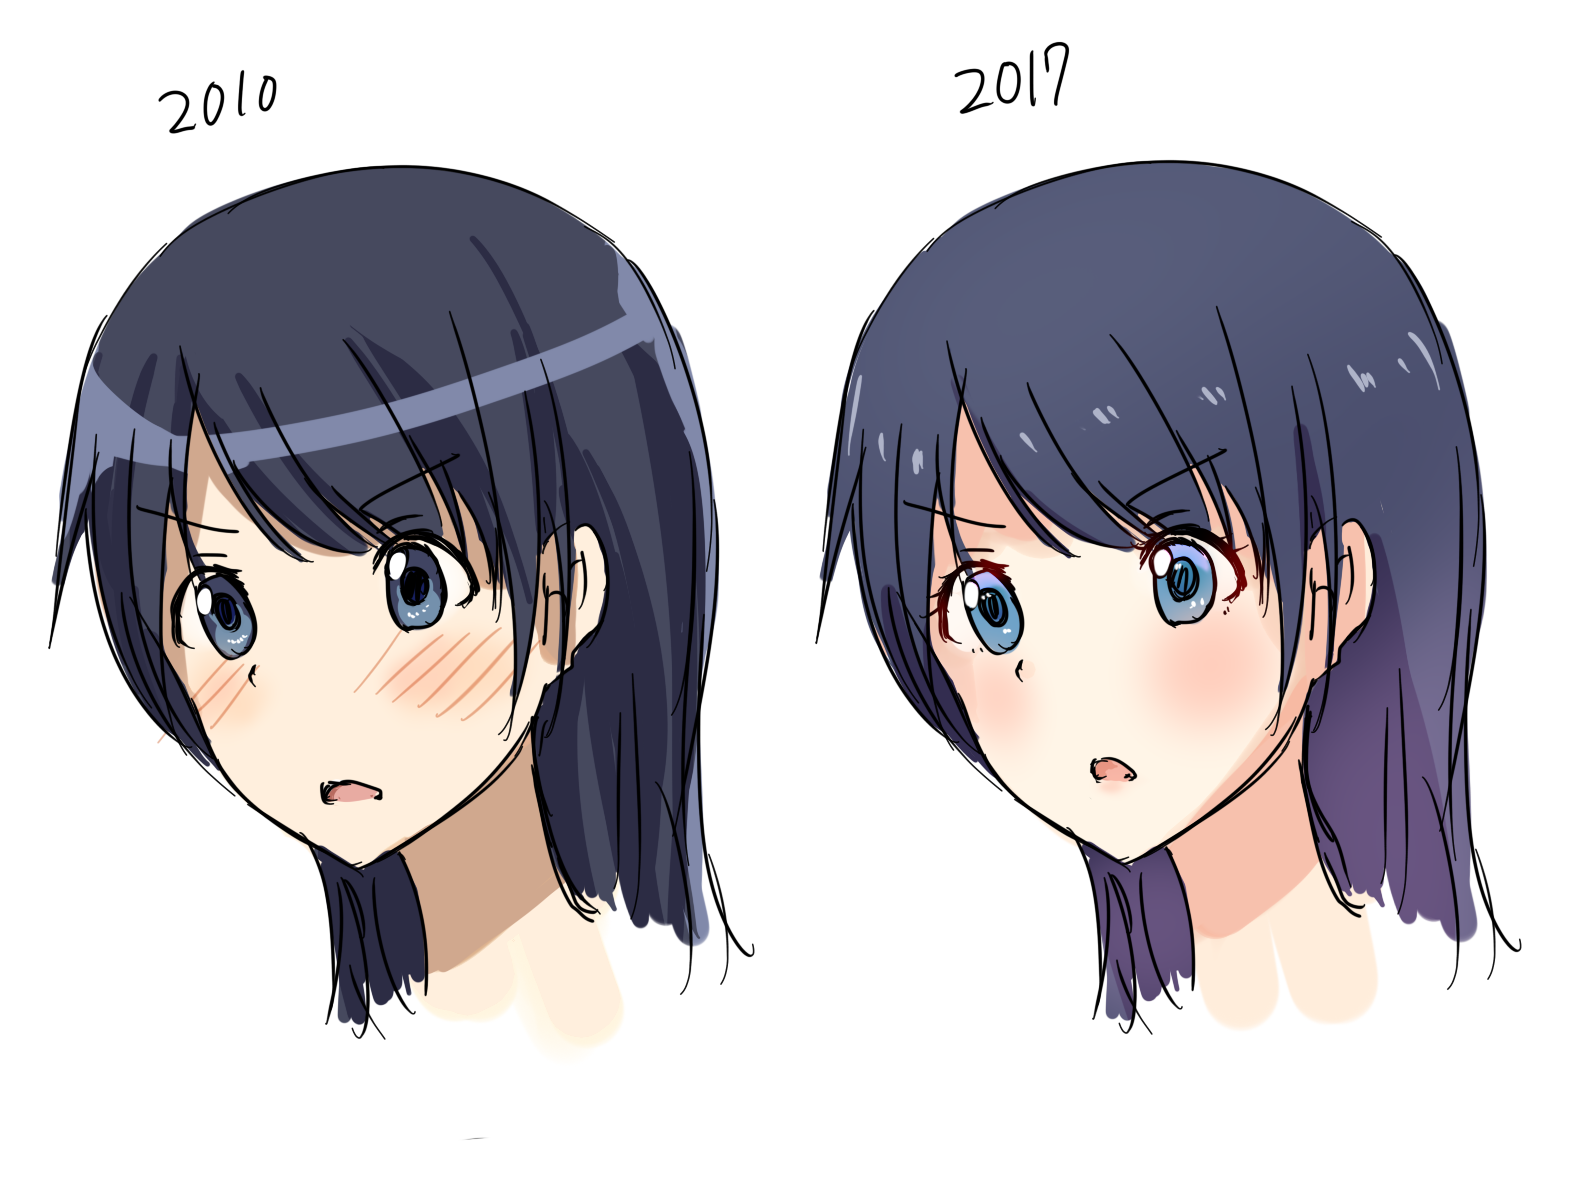 Kubo's improvement in the art style throughout the years : r/bleach